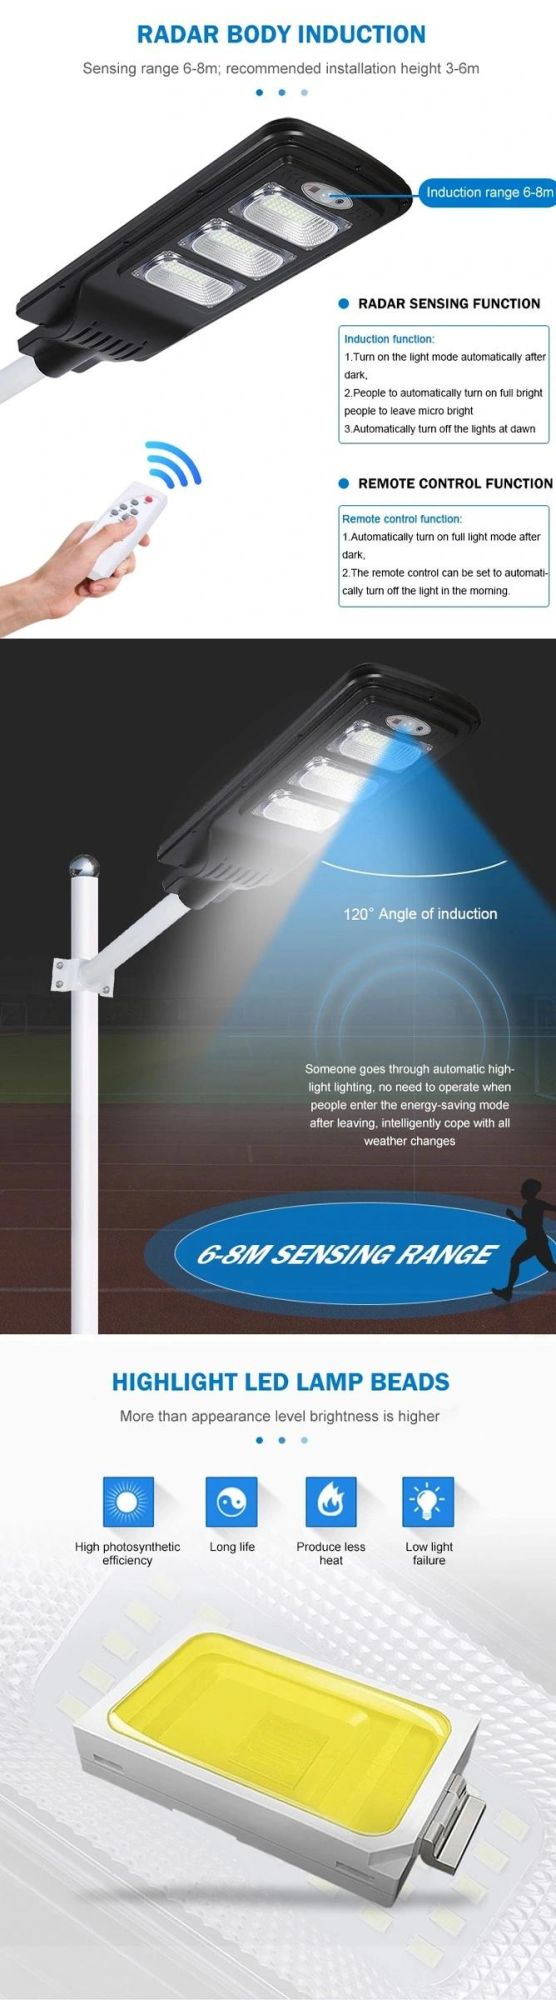 60W Integrated Solar LED All in One Street Light, IP65 Waterproof ABS 20W 40W 80W Energy Saving Power System Sensor Outdoor Road Lighting